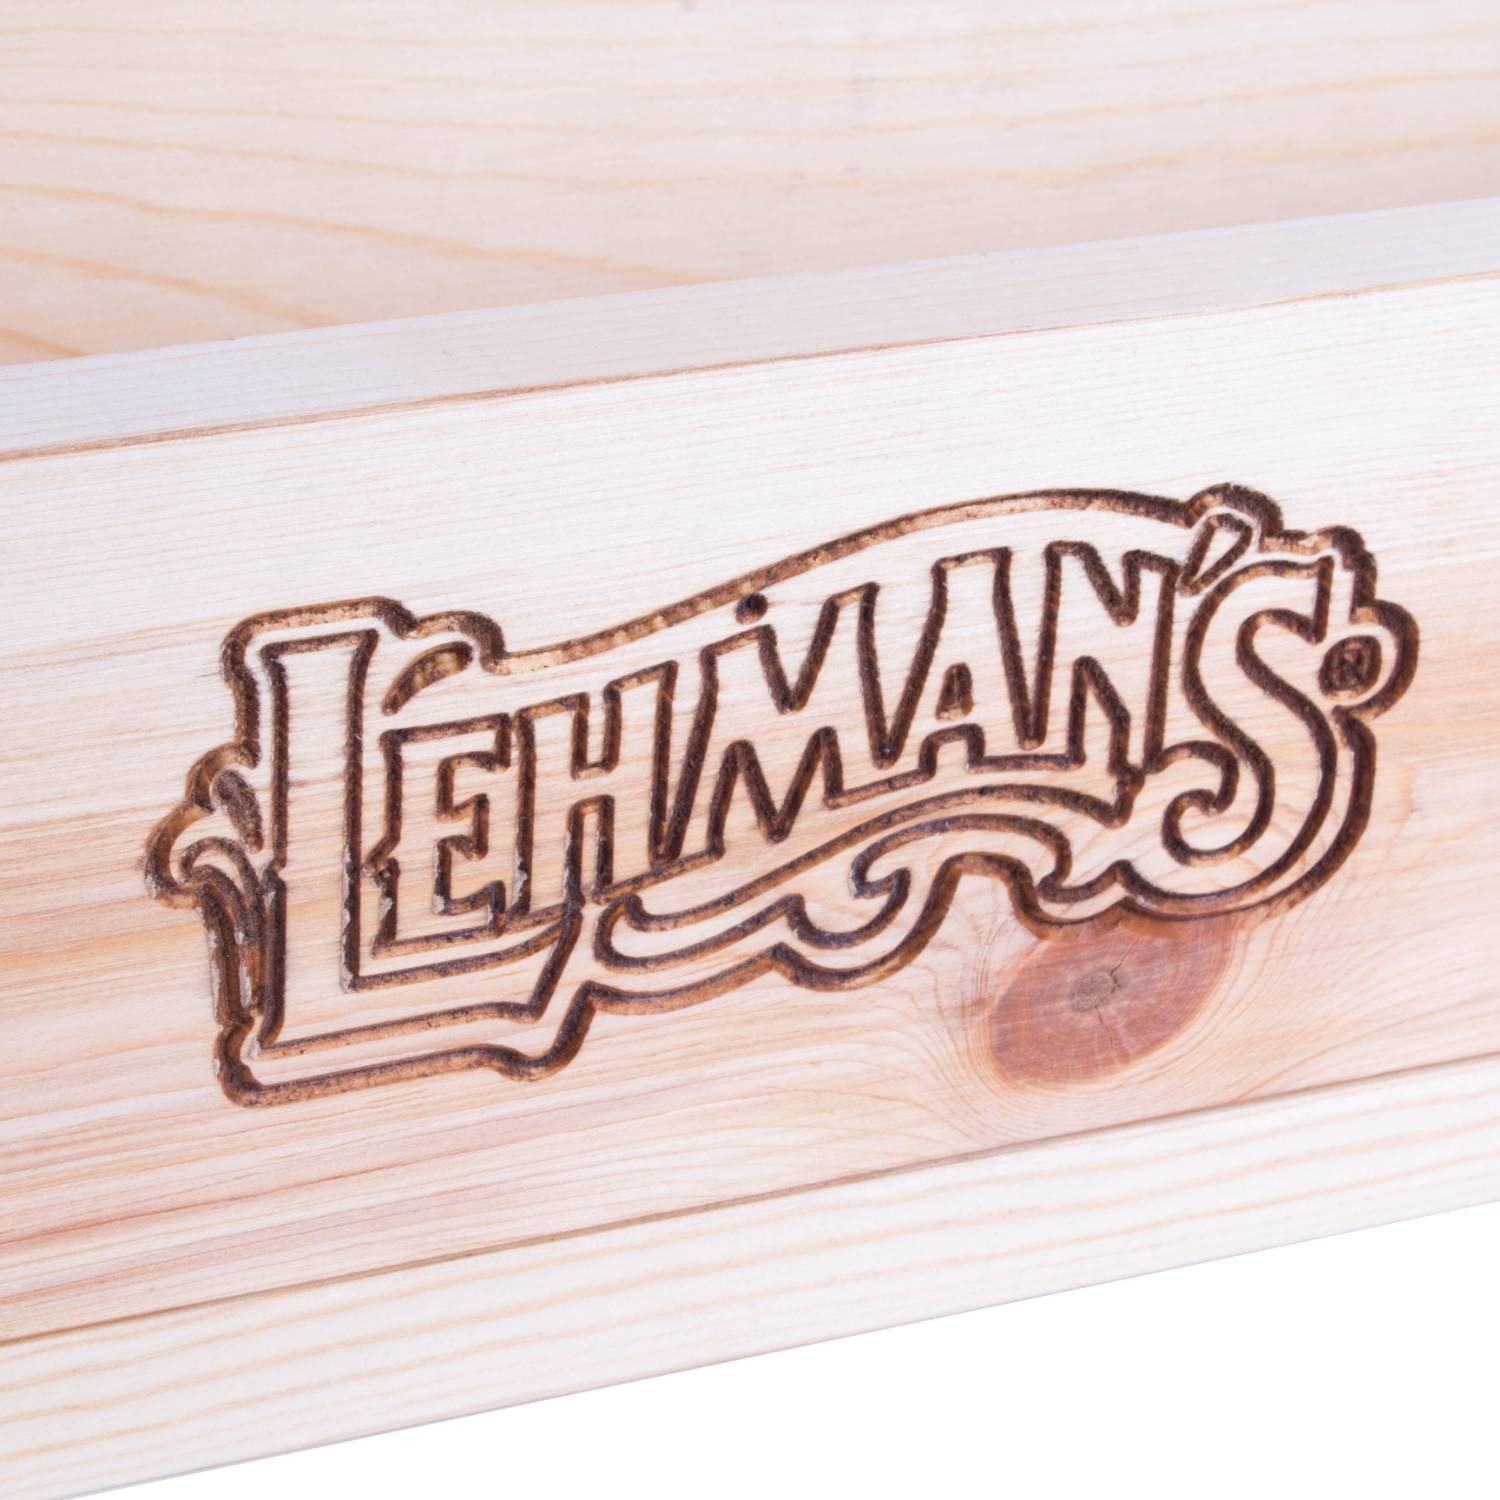 Lehman's Bar Soap Loaf Mold, 2 Pound, Stackable Durable Wood, Easily Disassemble to Cut Bars, Cold Process Insulating, Size: 2 lbs, Beige